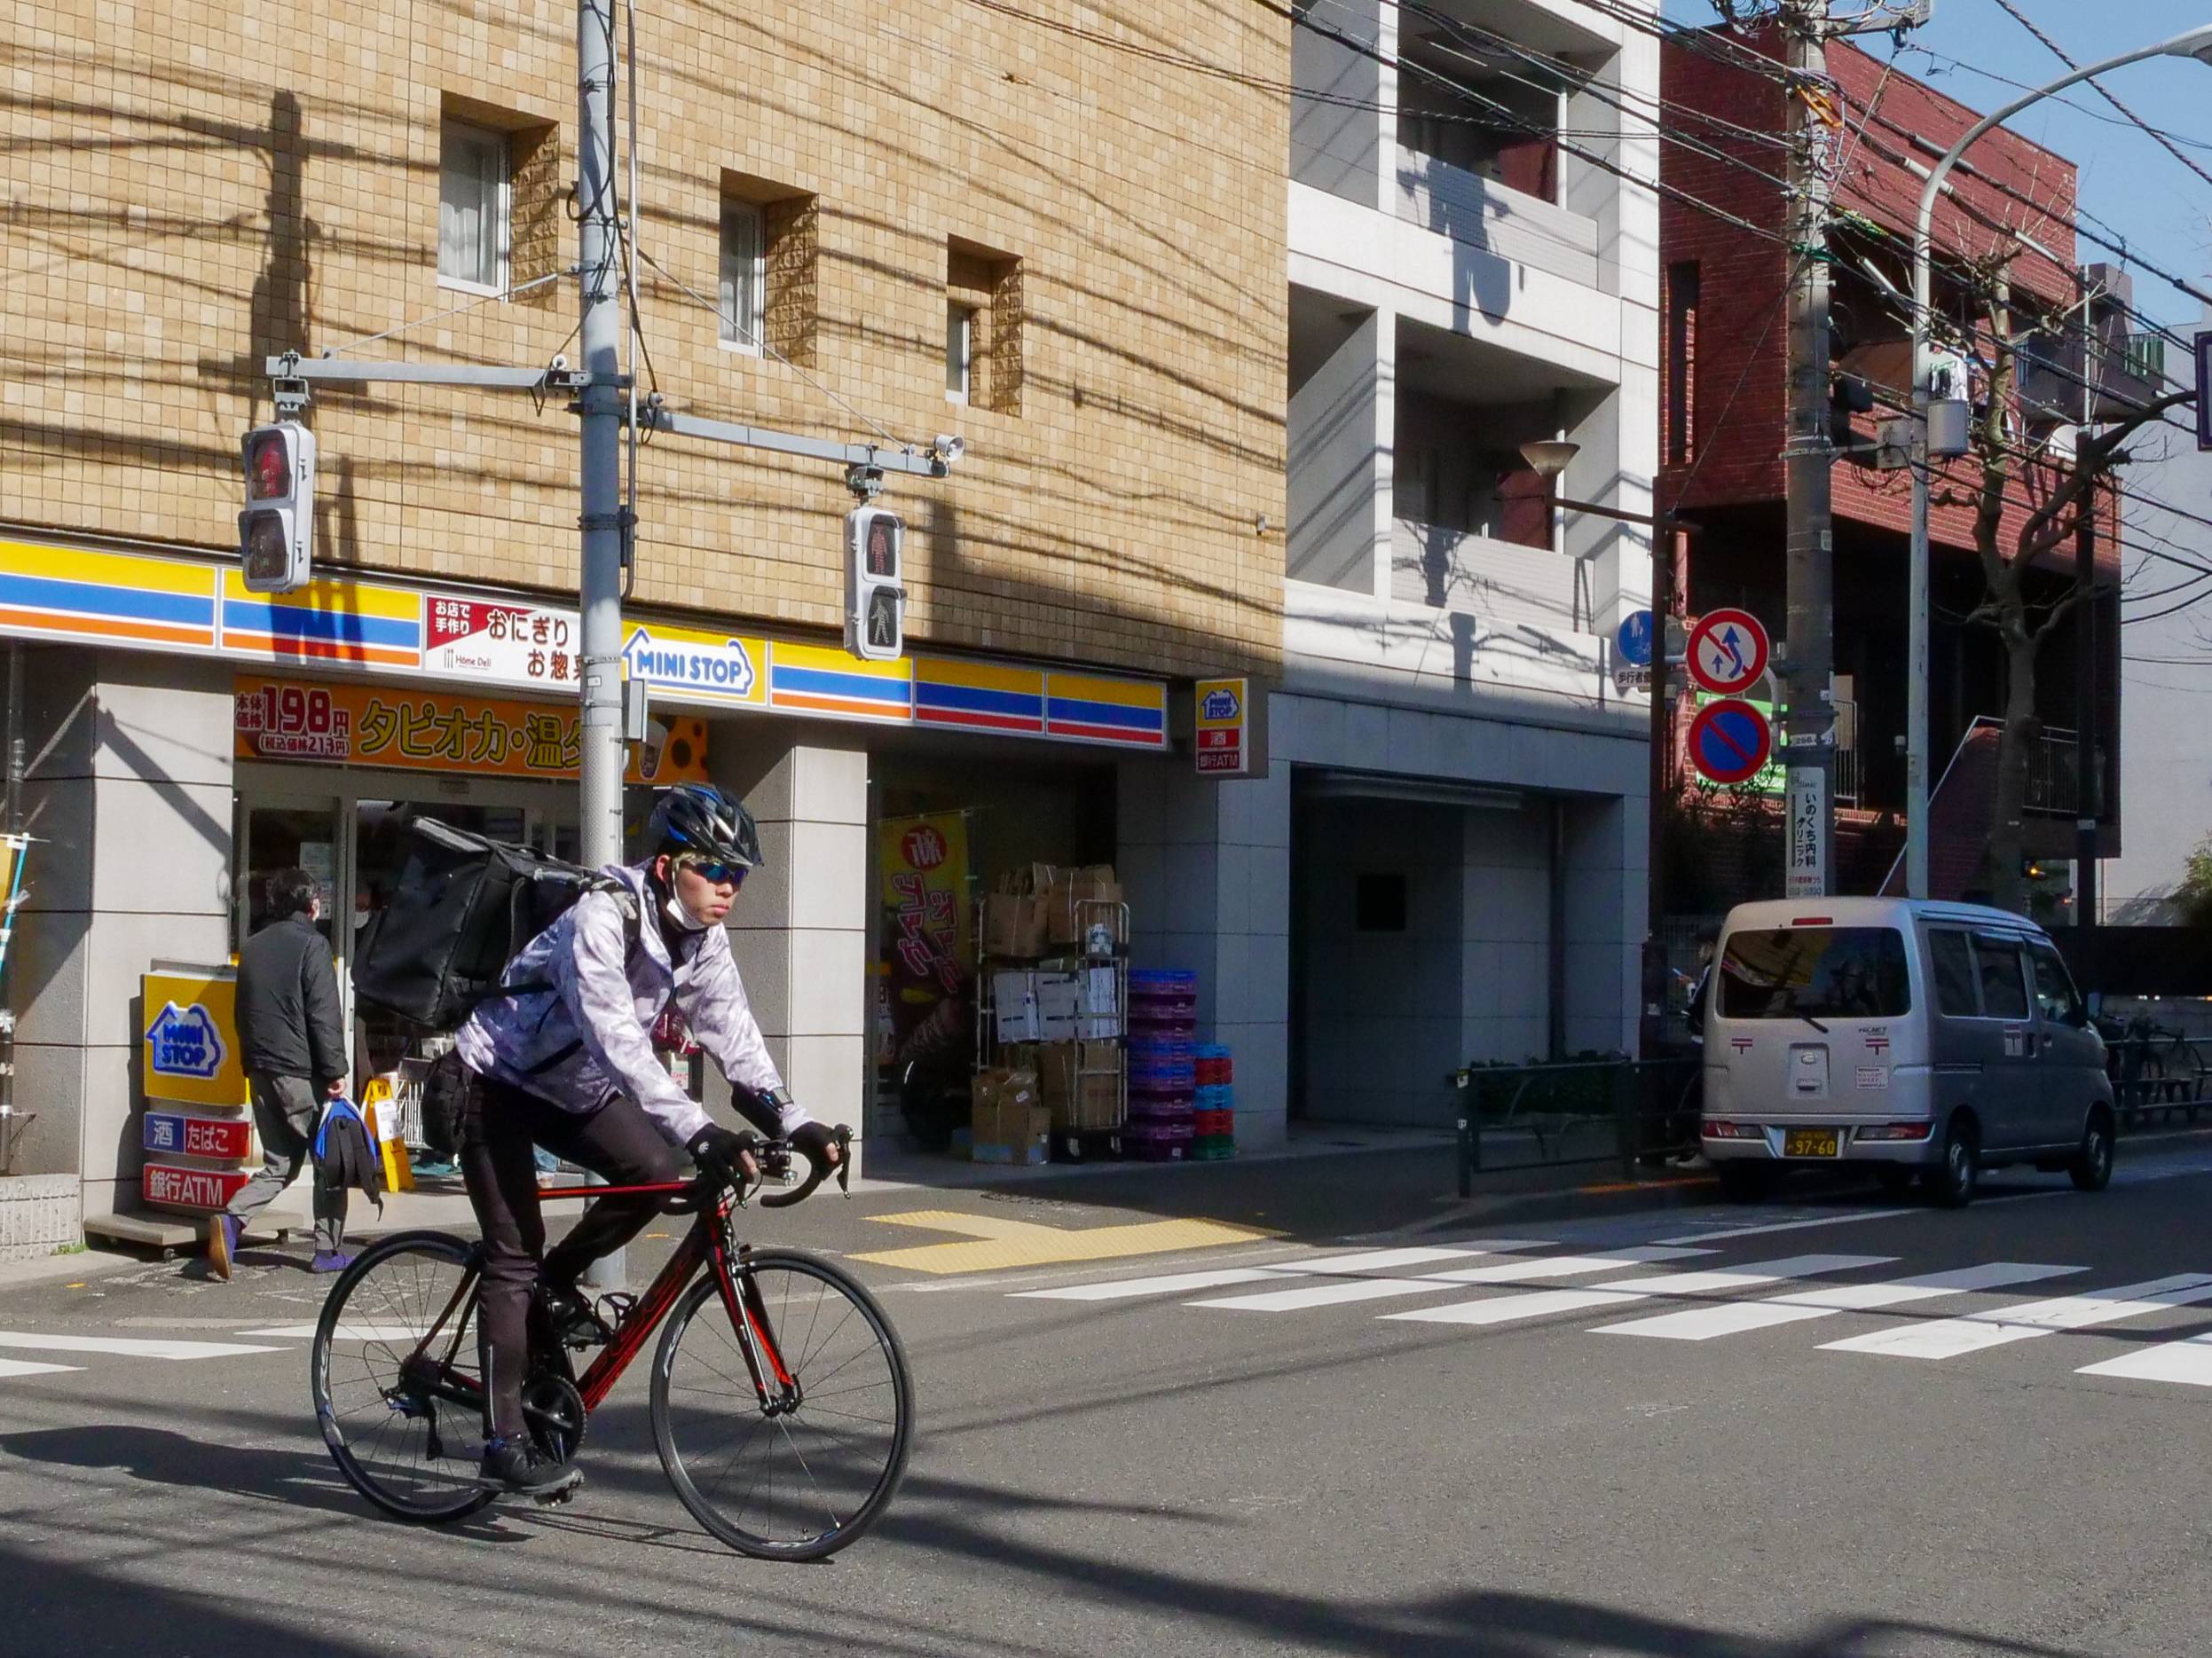 On the go: A helmeted cyclist passes in front of a convenience store in the Tokyo metropolitan area. | PHOEBE AMOROSO